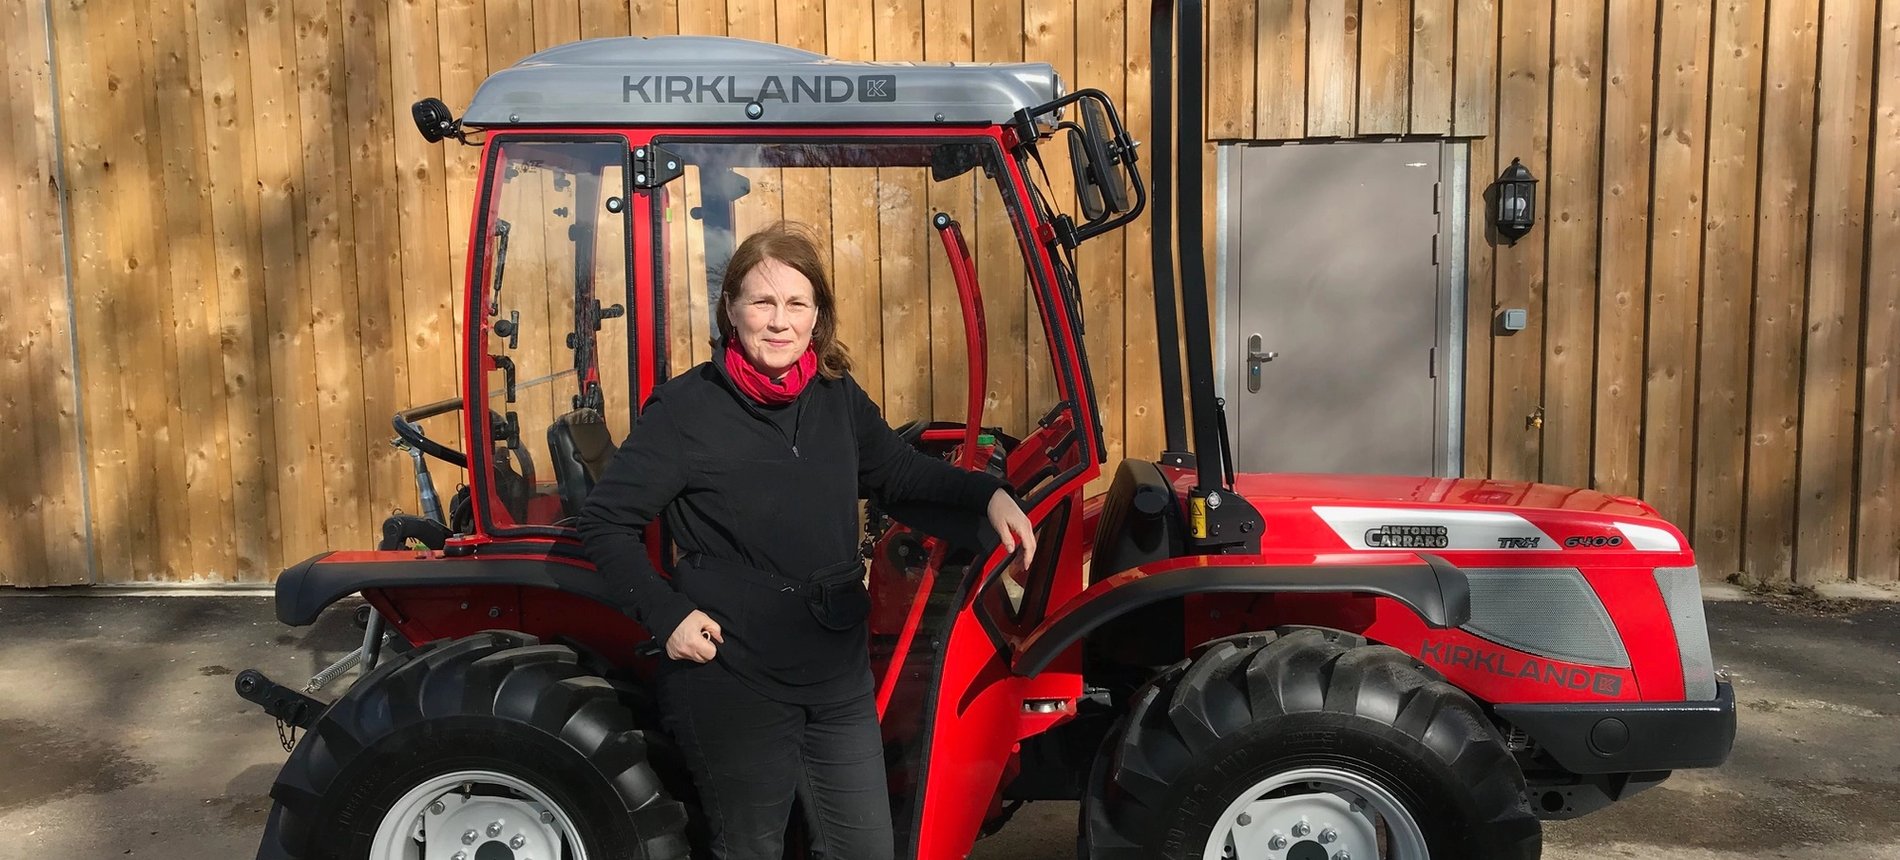 ‘Great Value’ TRX 6400 Tractor for Moralee Farm & Vineyard!